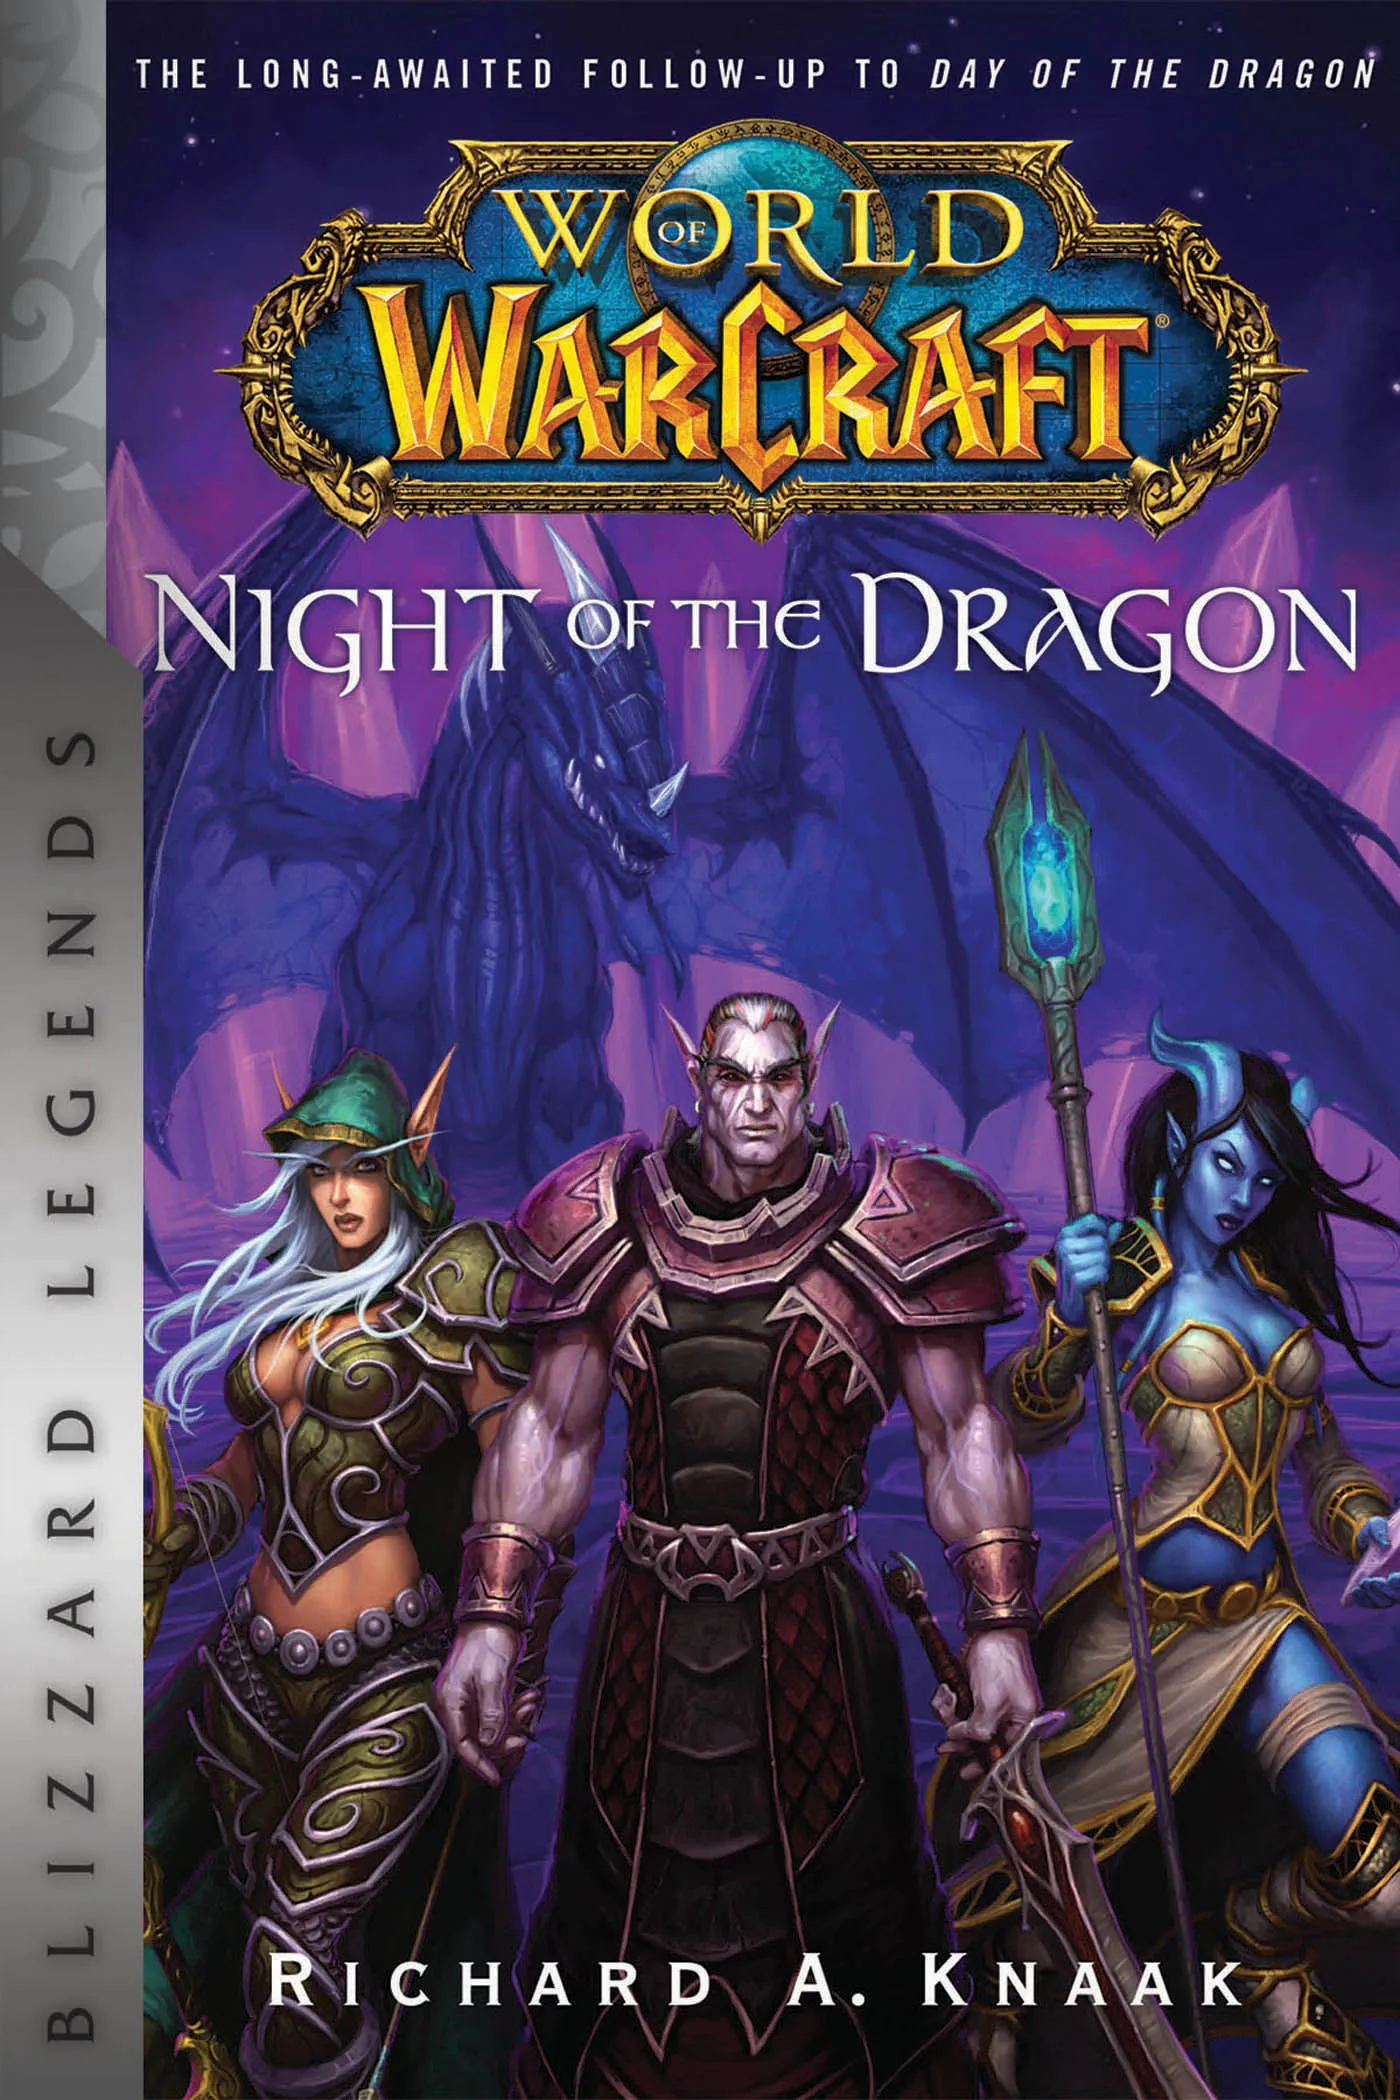 Night of the Dragon (World of Warcraft #5)